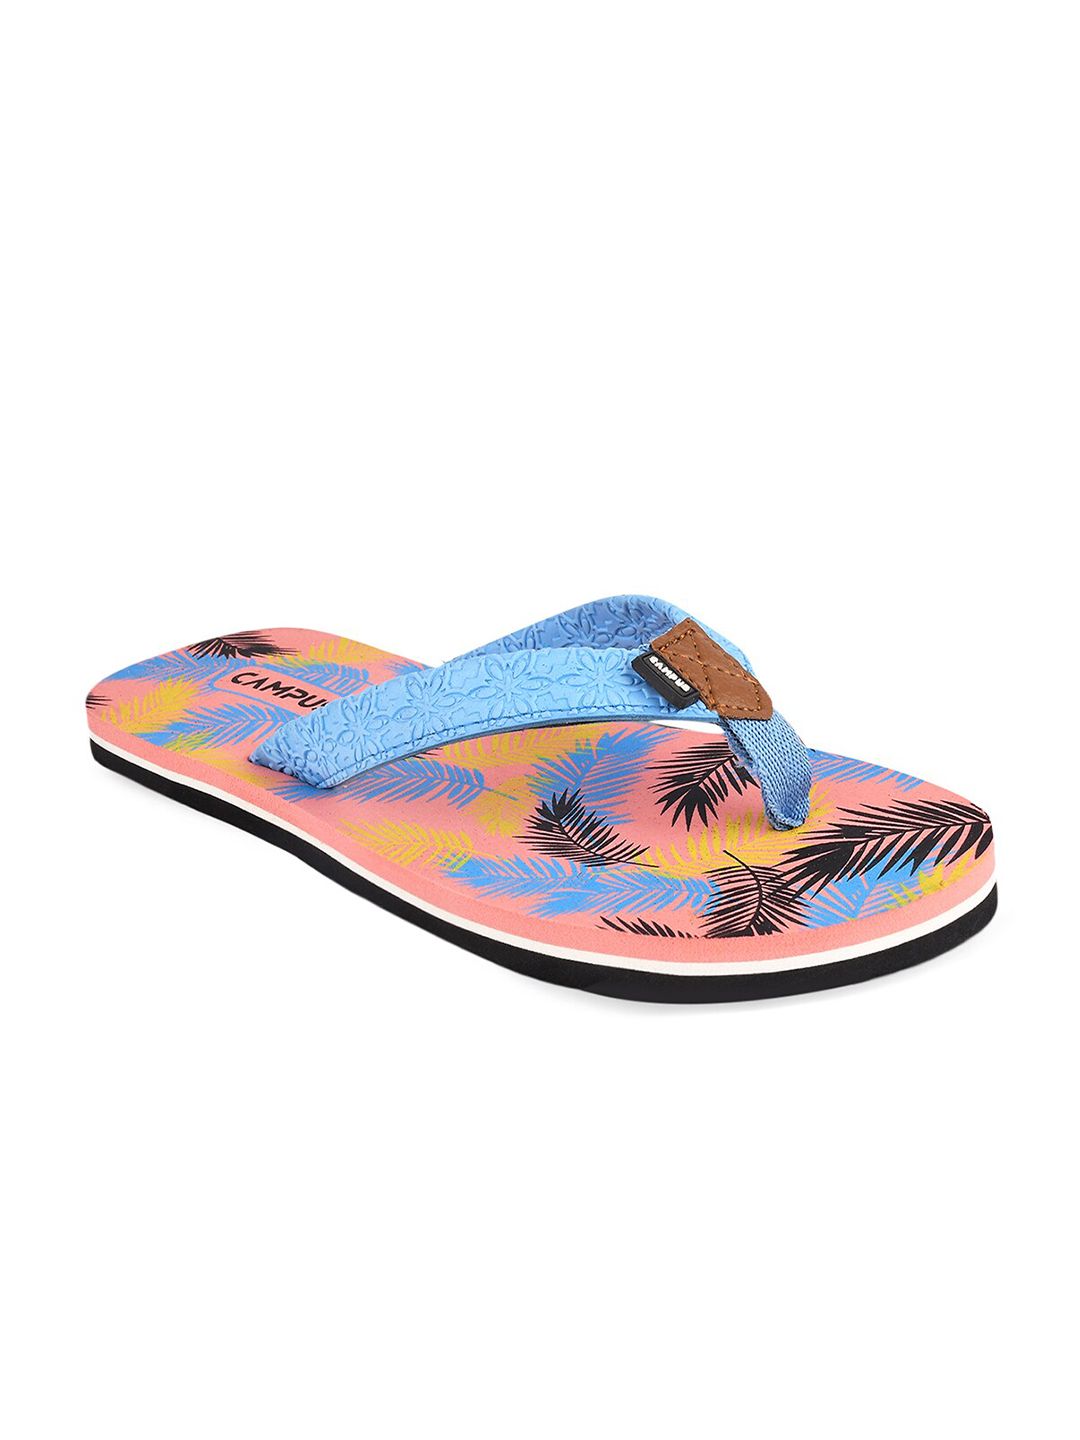 Campus Women Peach-Coloured & Blue Printed Thong Flip-Flops Price in India